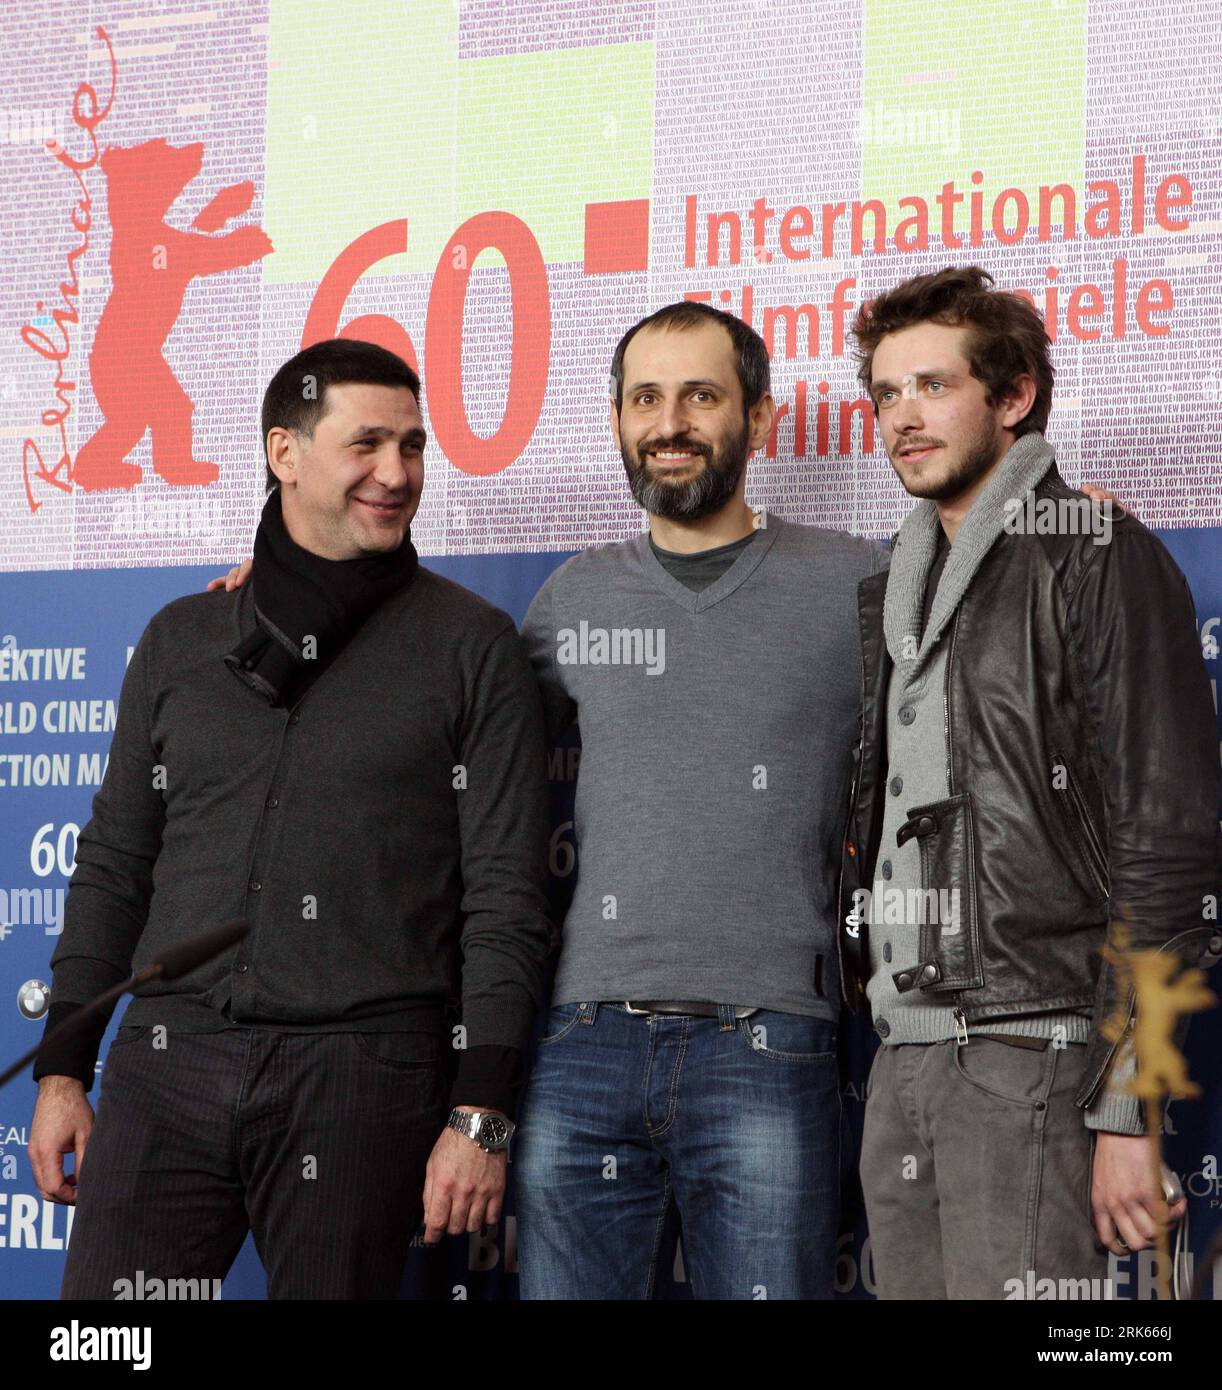 Bildnummer: 53803210  Datum: 17.02.2010  Copyright: imago/Xinhua (100217) -- BERLIN, Feb. 17, 2010 (Xinhua) -- Russian actor Grigoriy Dobrygin, Russian director Alexej Popogrebsky and Russian actor Sergei Puskepalis (R-L) pose for pictures during a press conference for the film How I Ended This Summer during the 60th Berlin International Film Festival in Berlin, capital of Germany, Feb. 17, 2010. Twenty pictures are vying for the coveted Golden Bear top prize at the film festival taking place from February 11 to 21, 2010. (Xinhua/Luo Huanhuan) (gxr) (1)GERMANY-HOW I ENDED THIS SUMMER PUBLICATI Stock Photo